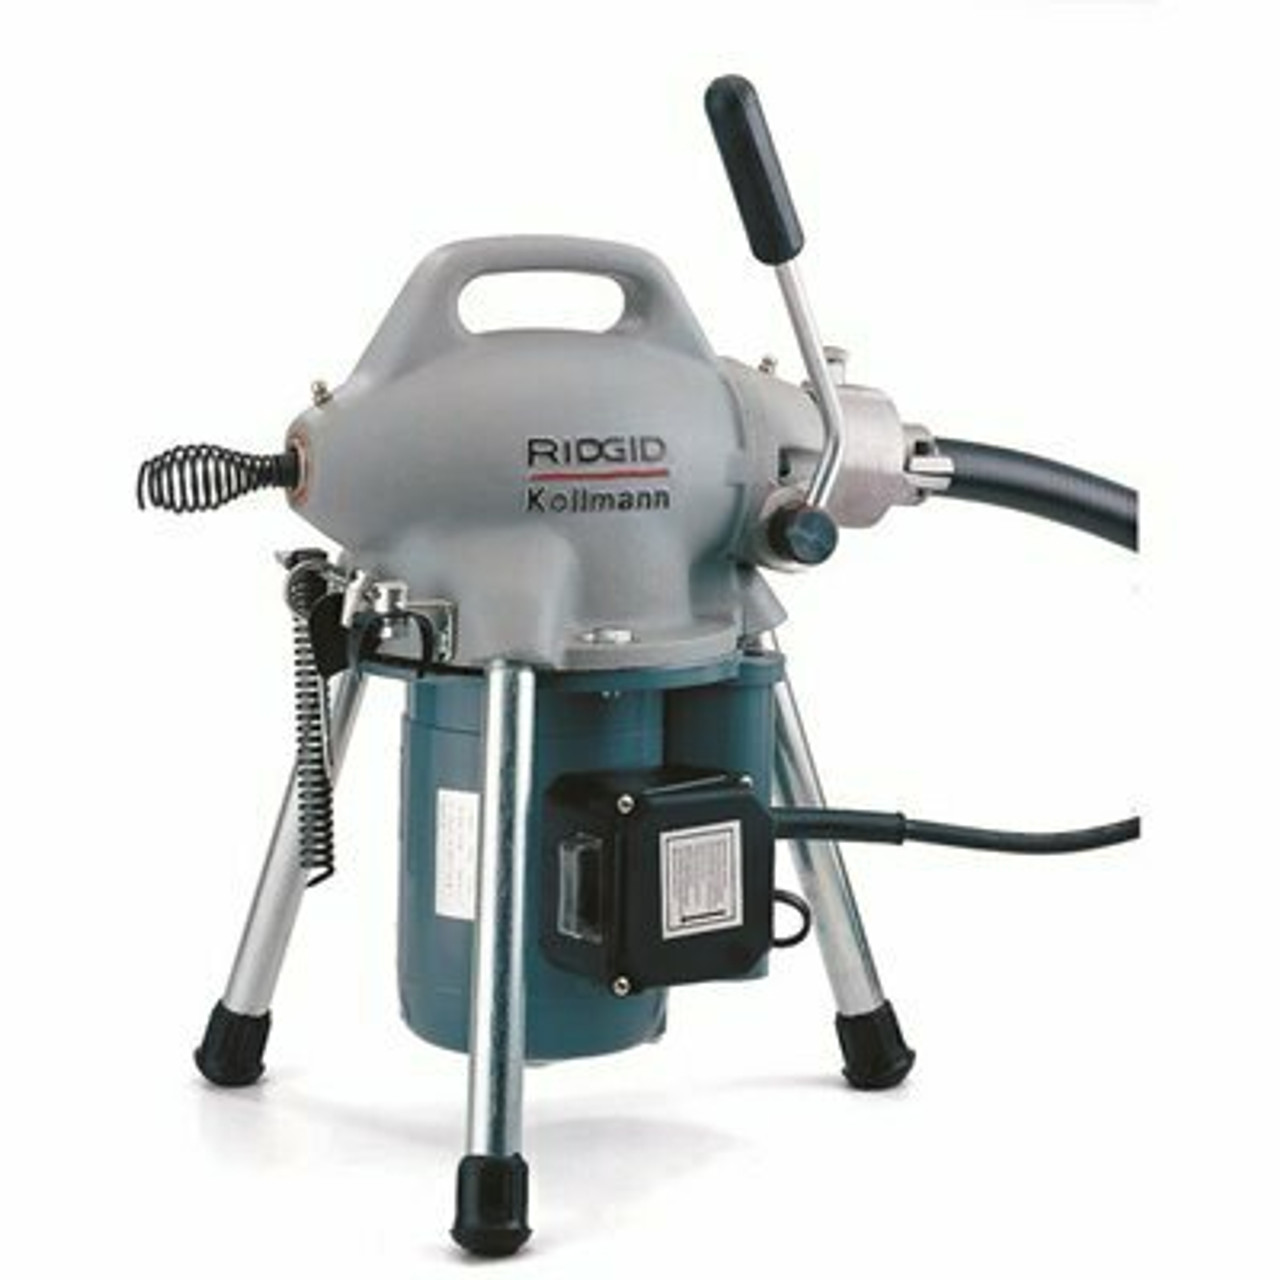 Ridgid 115-Volt K-50 Sectional Drain Cleaner Machine For 1-1/4 In. To 4 In. Drain Lines